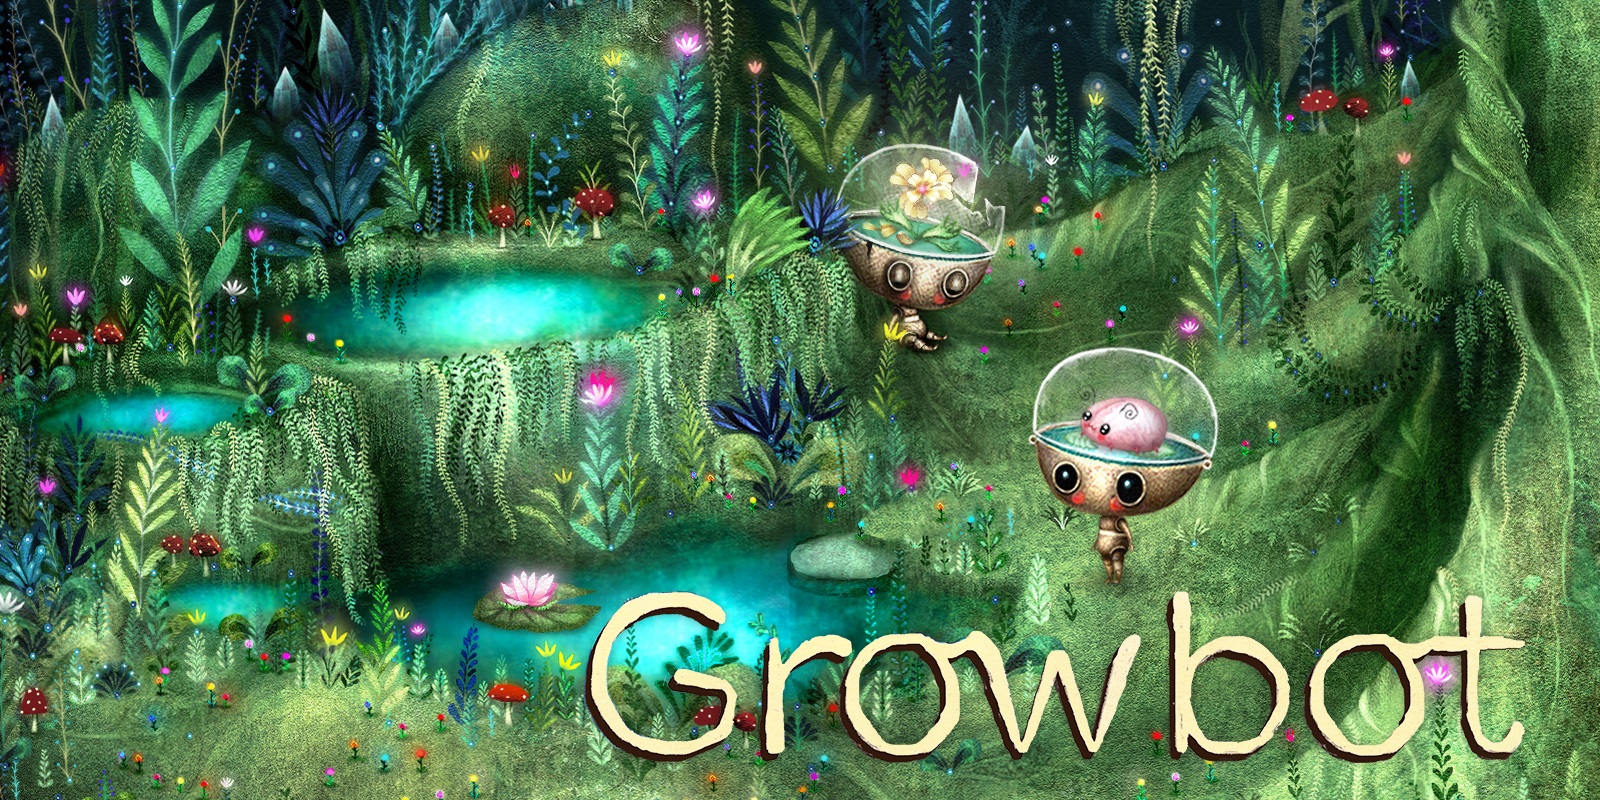 Growbot is a classic adventure game designed by children’s book illustrator